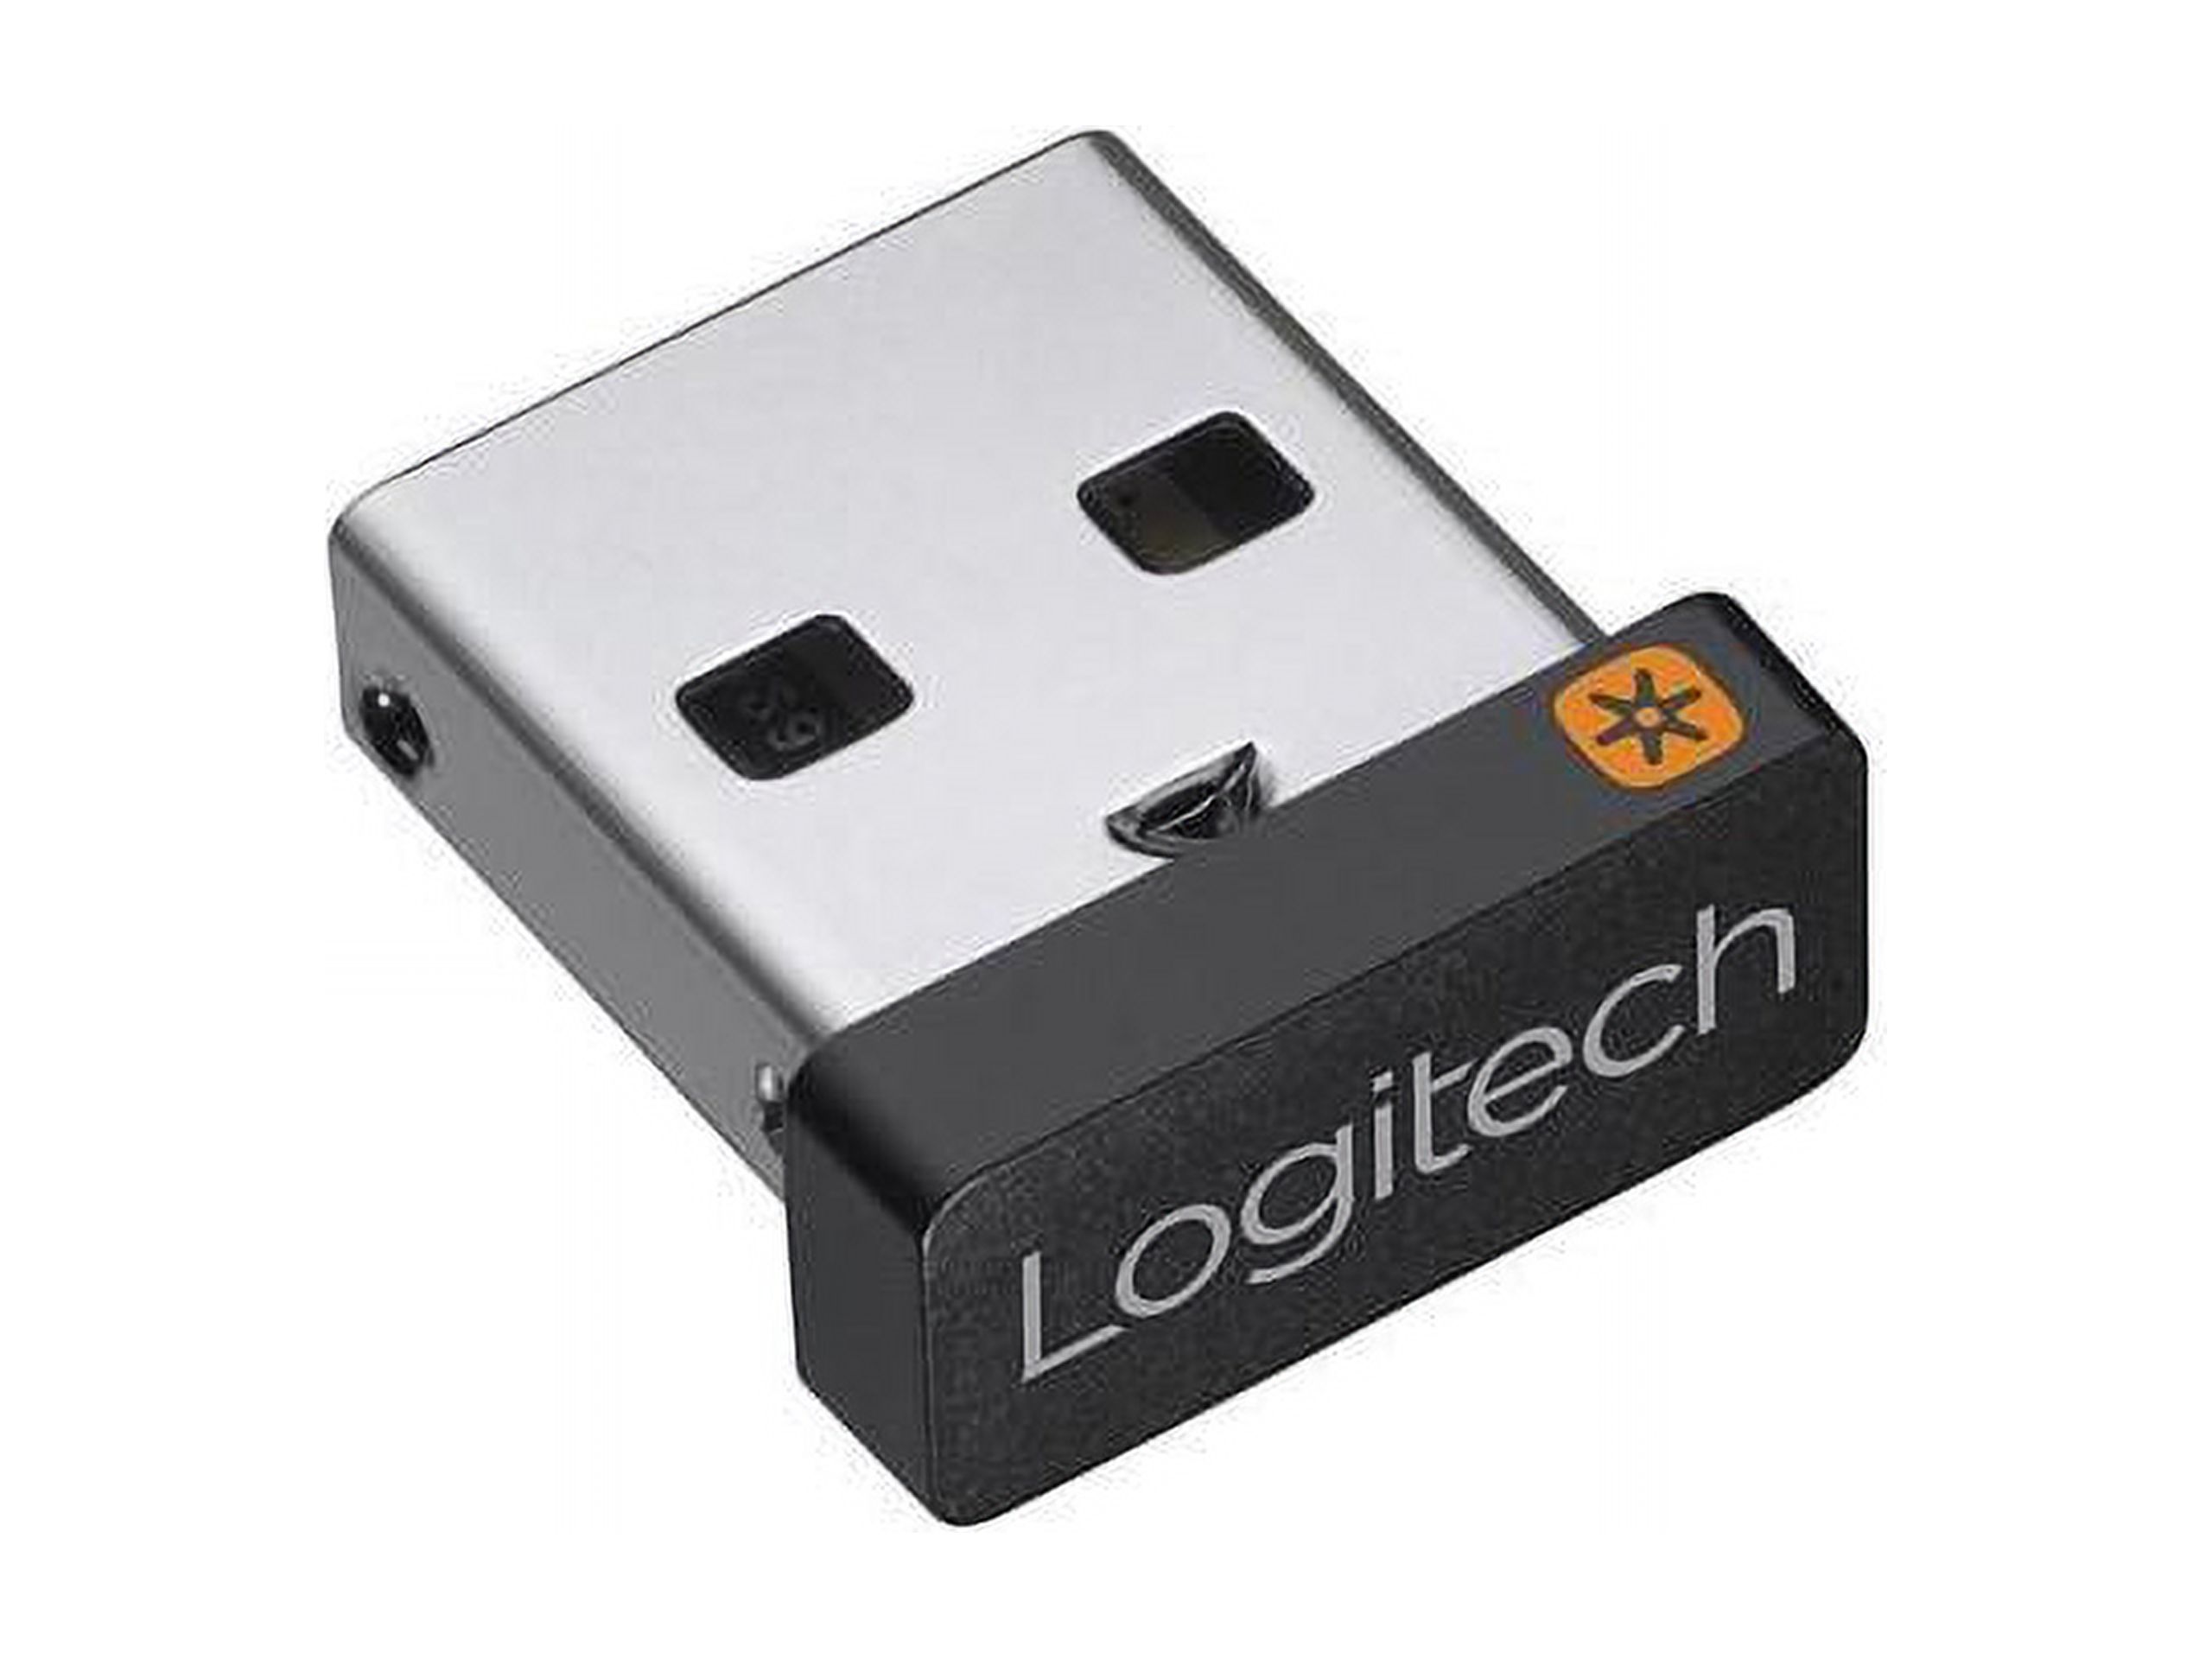 Logitech Wireless Mouse / Keyboard USB Unifying Receiver - image 1 of 20